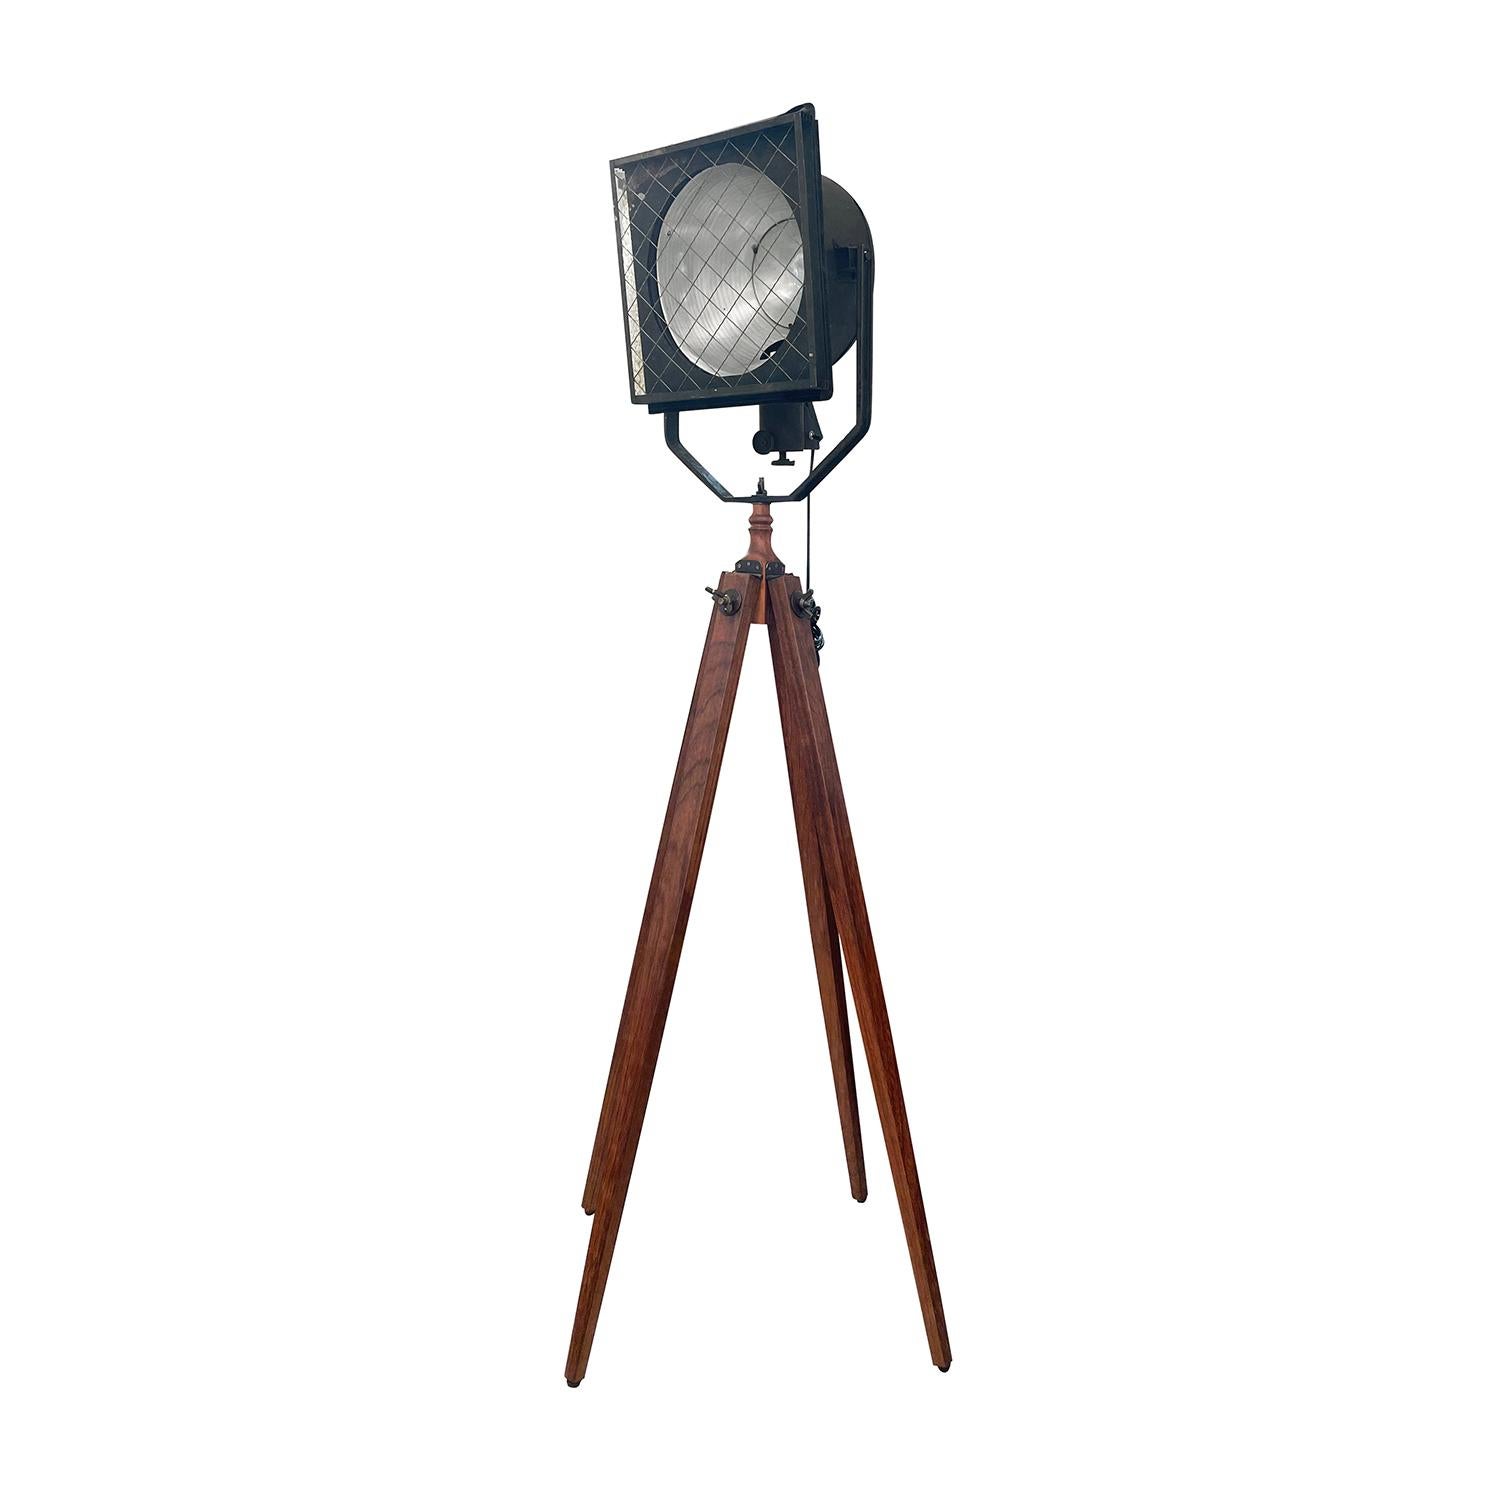 A vintage Industrial French spotlight made of hand crafted metal, in good condition. The detailed theater, cinema studio lamp is composed with a large adjustable rectangular shade, featuring a single light socket. The cinema lamp is standing on four